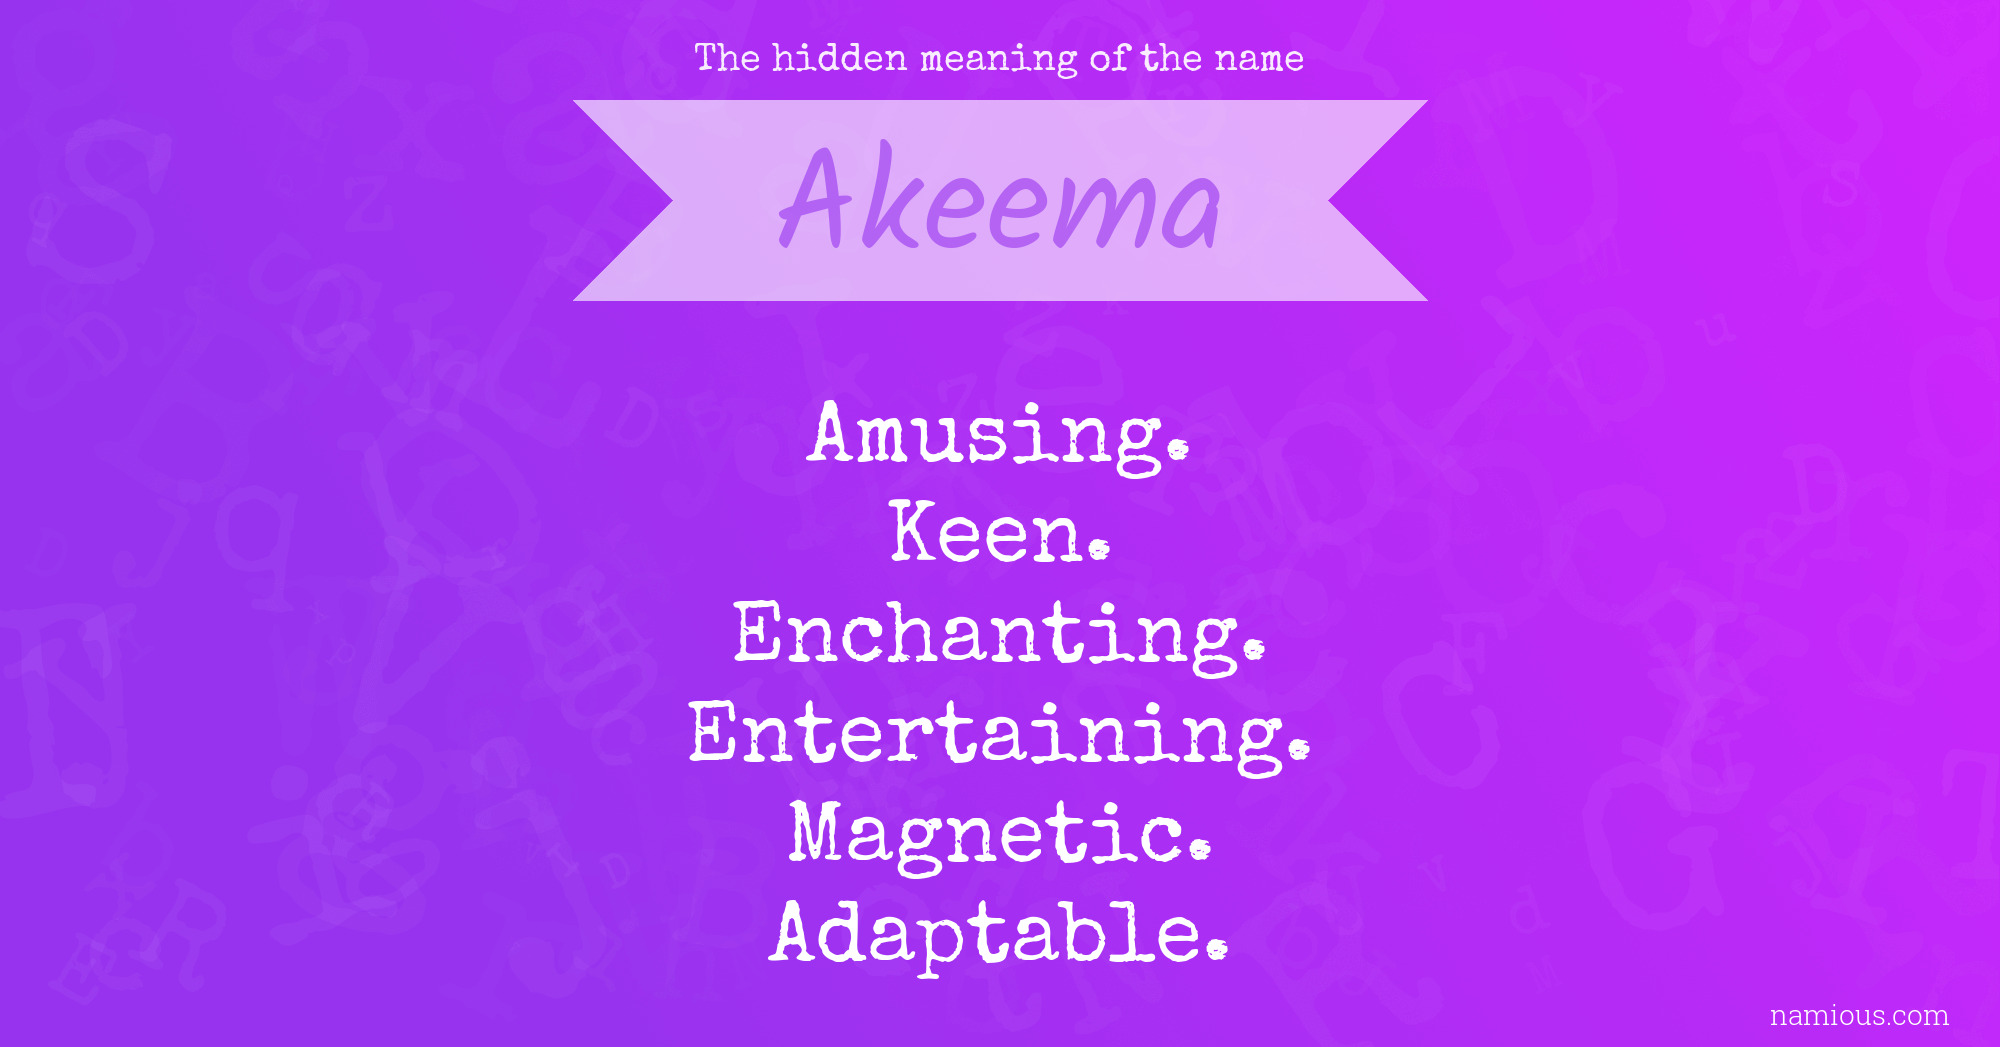 The hidden meaning of the name Akeema